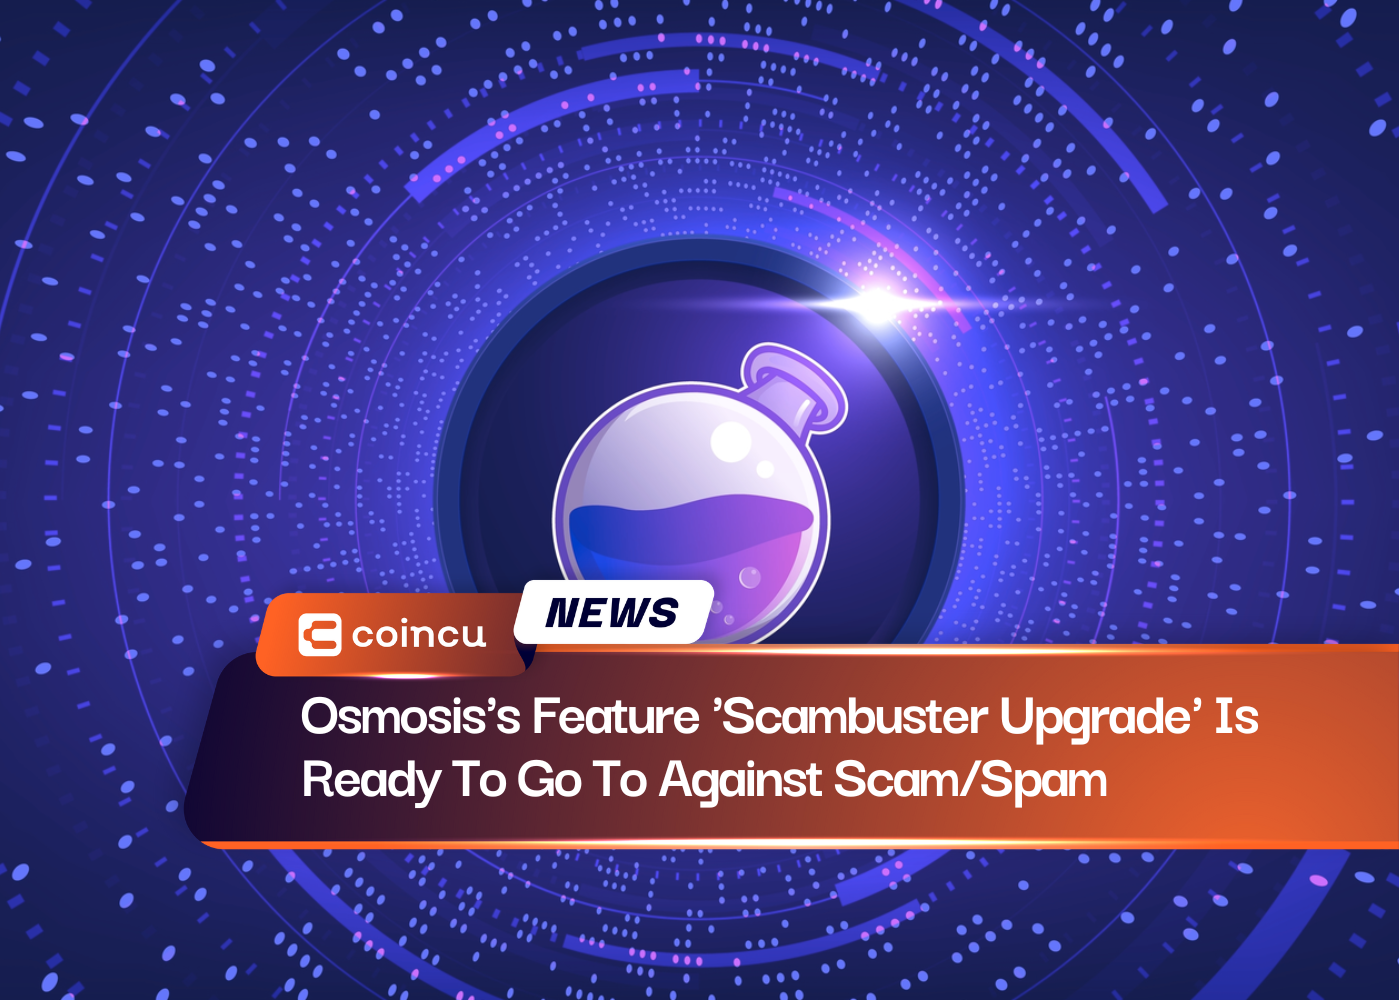 Osmosis's Feature 'Scambuster Upgrade' Is Ready To Go To Against Scam/Spam